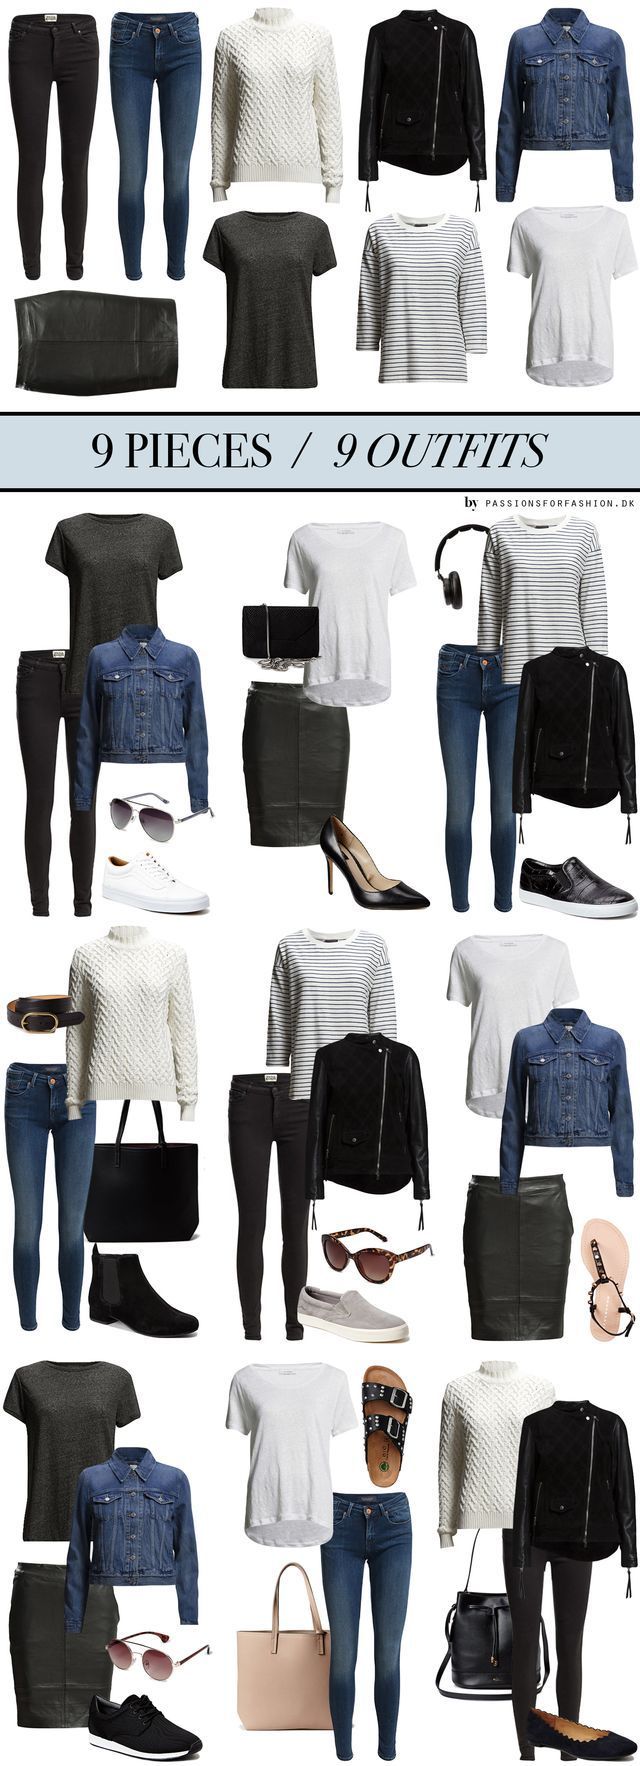 Contains affiliate links: black jeans/Twist & Tango HERE, blue jeans/Maison Scotch HERE, pullover/Gestuz HERE, leather jacket/J.